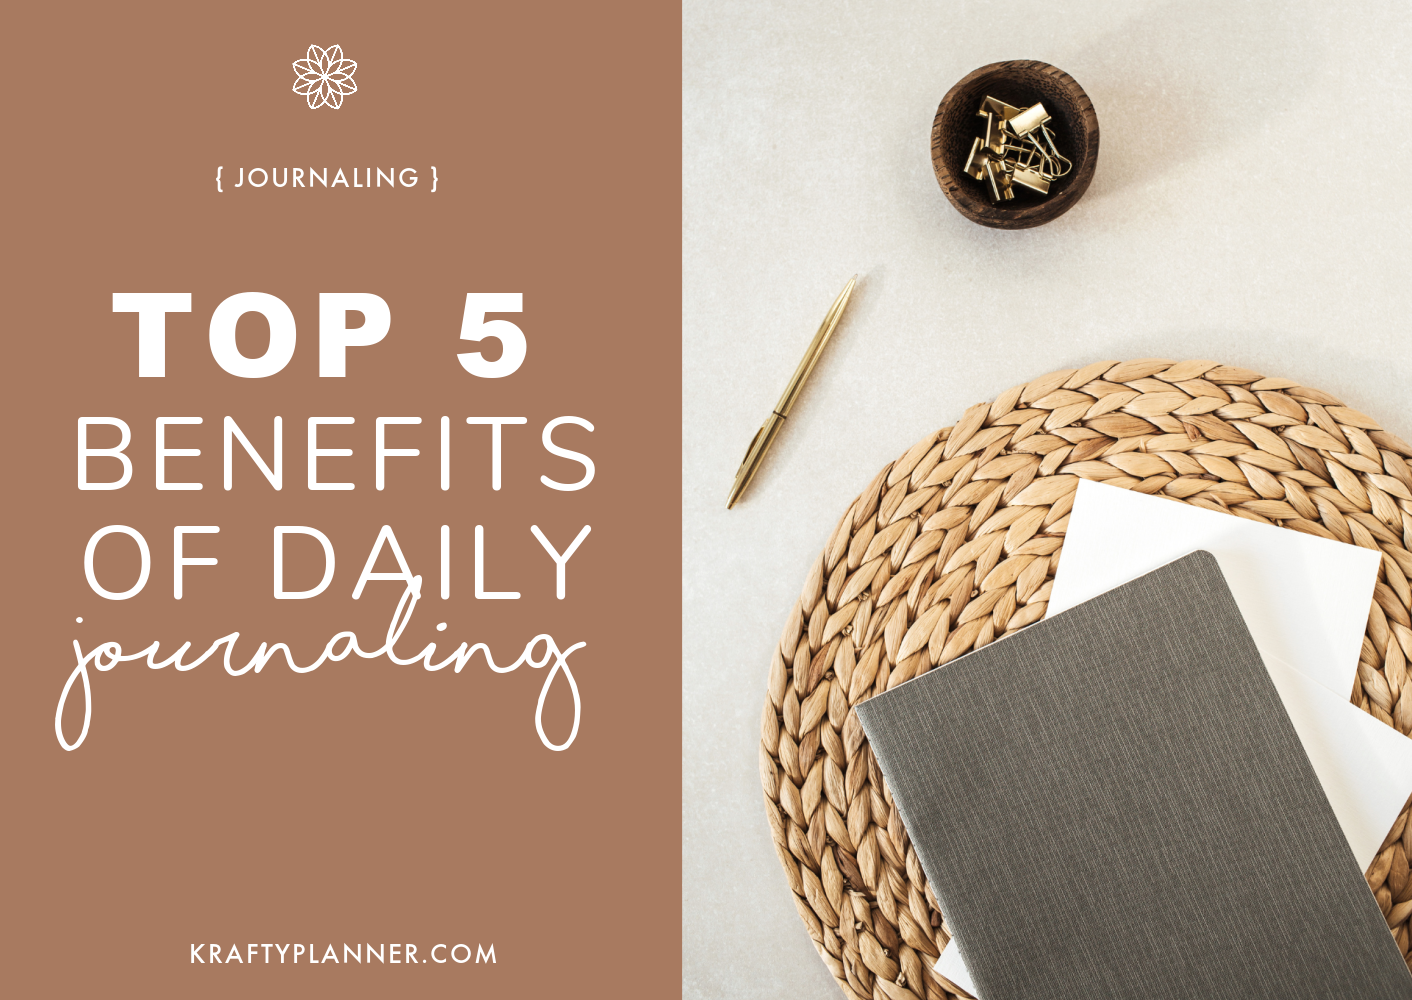 Top 5 Benefits of Daily Journaling